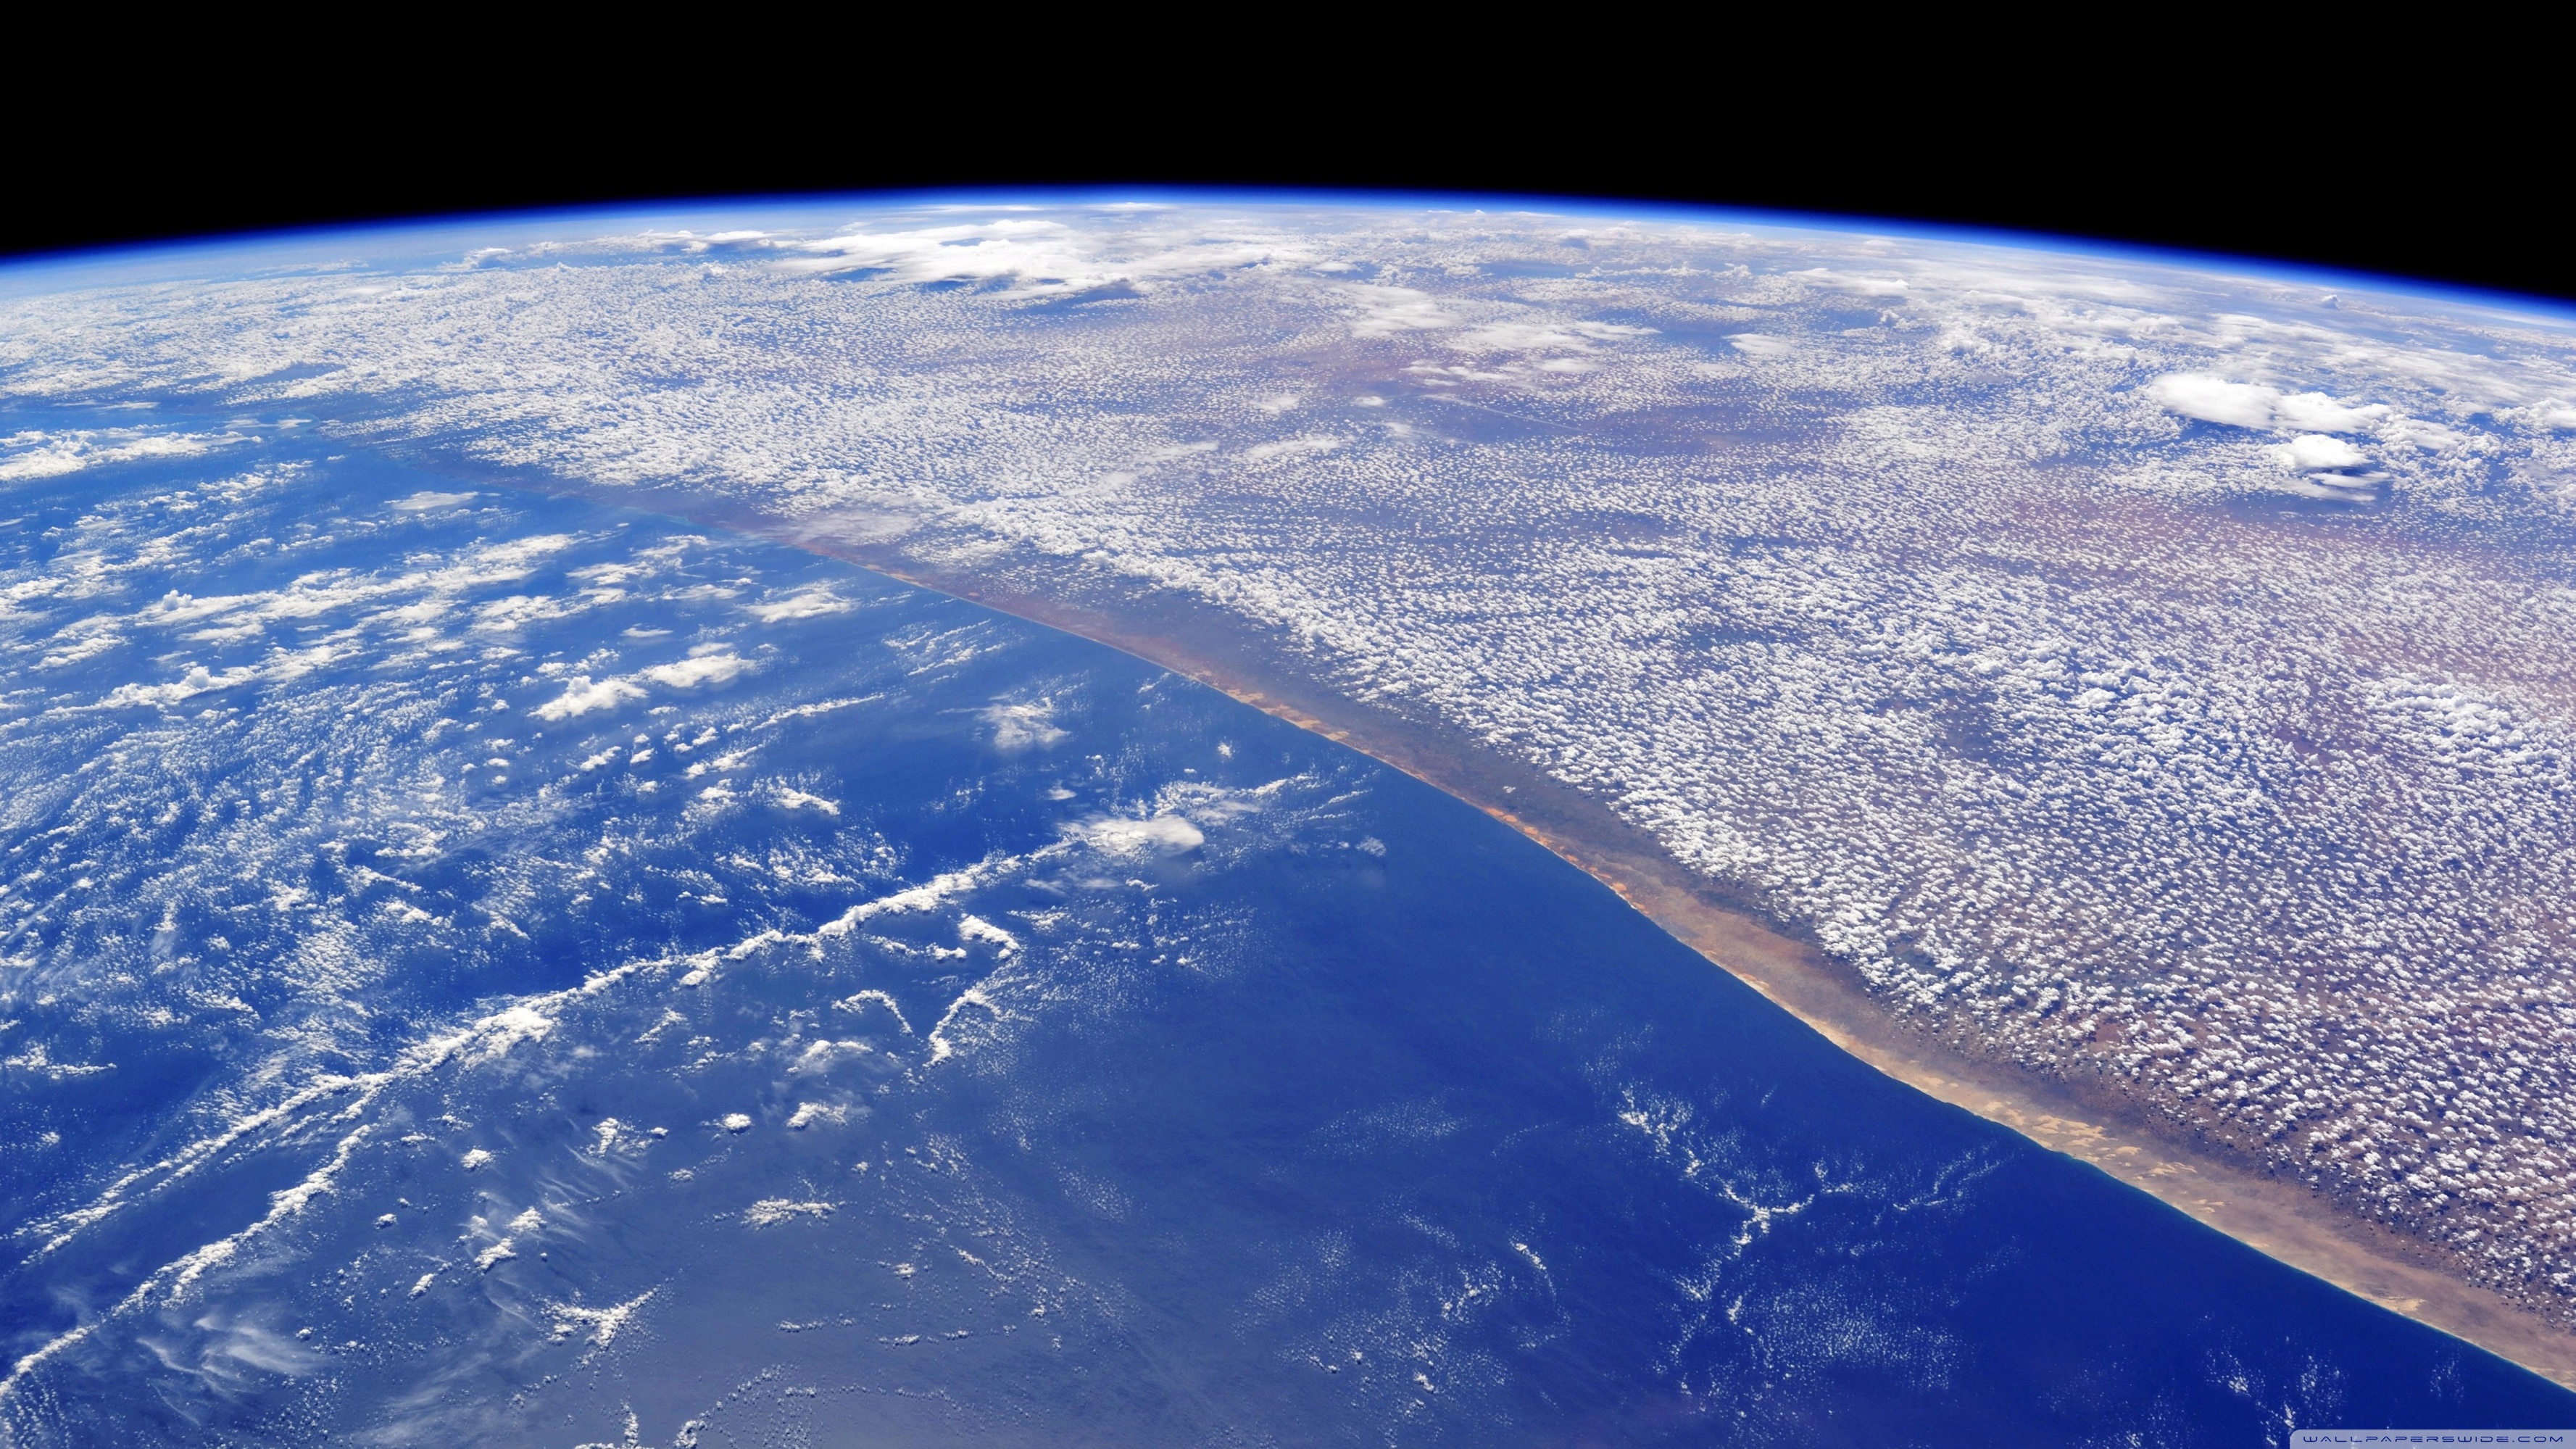 Indian Ocean View From Space - HD Wallpaper 